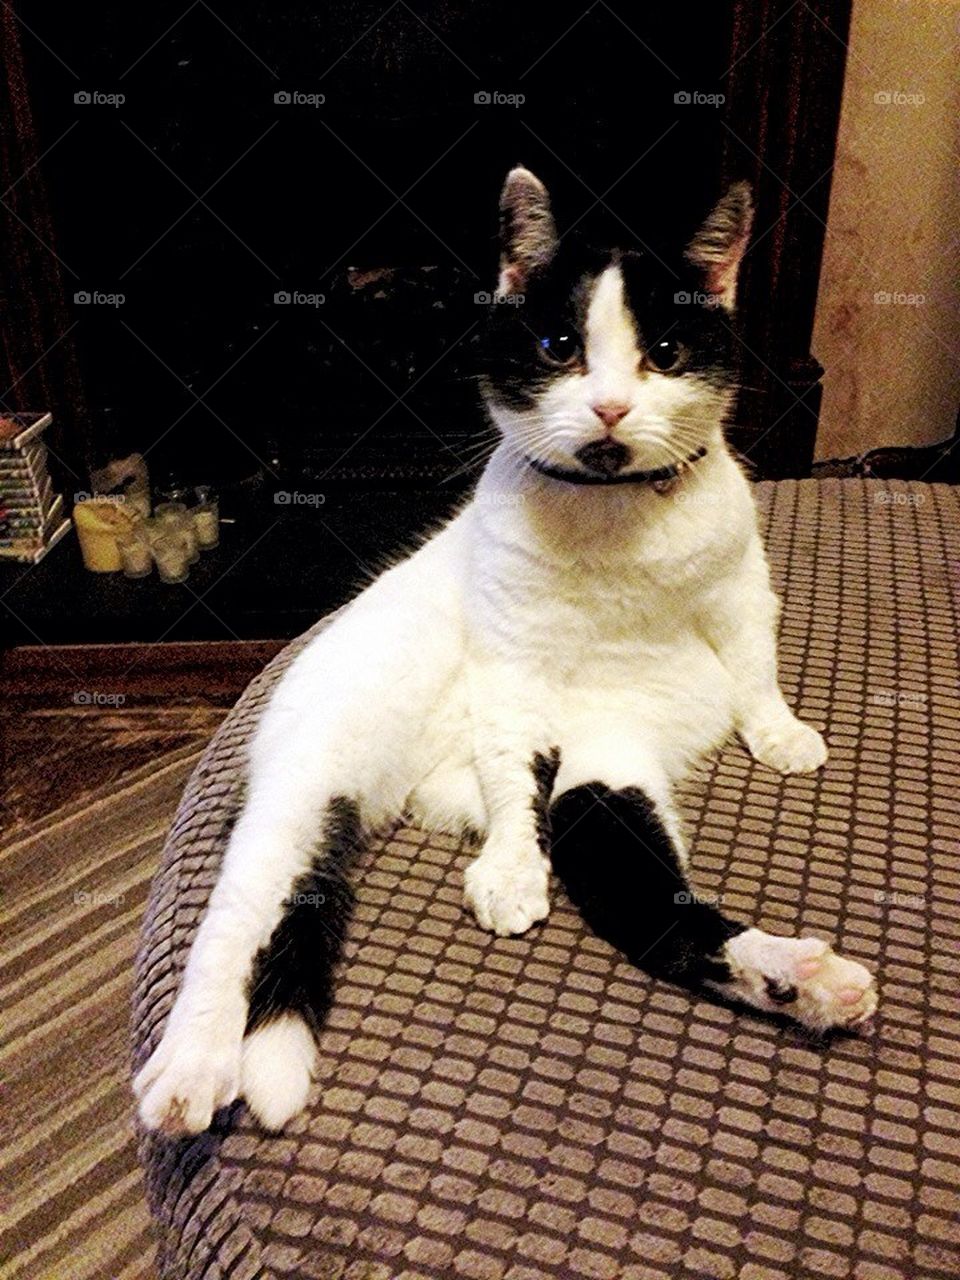 Black and white cat sitting up